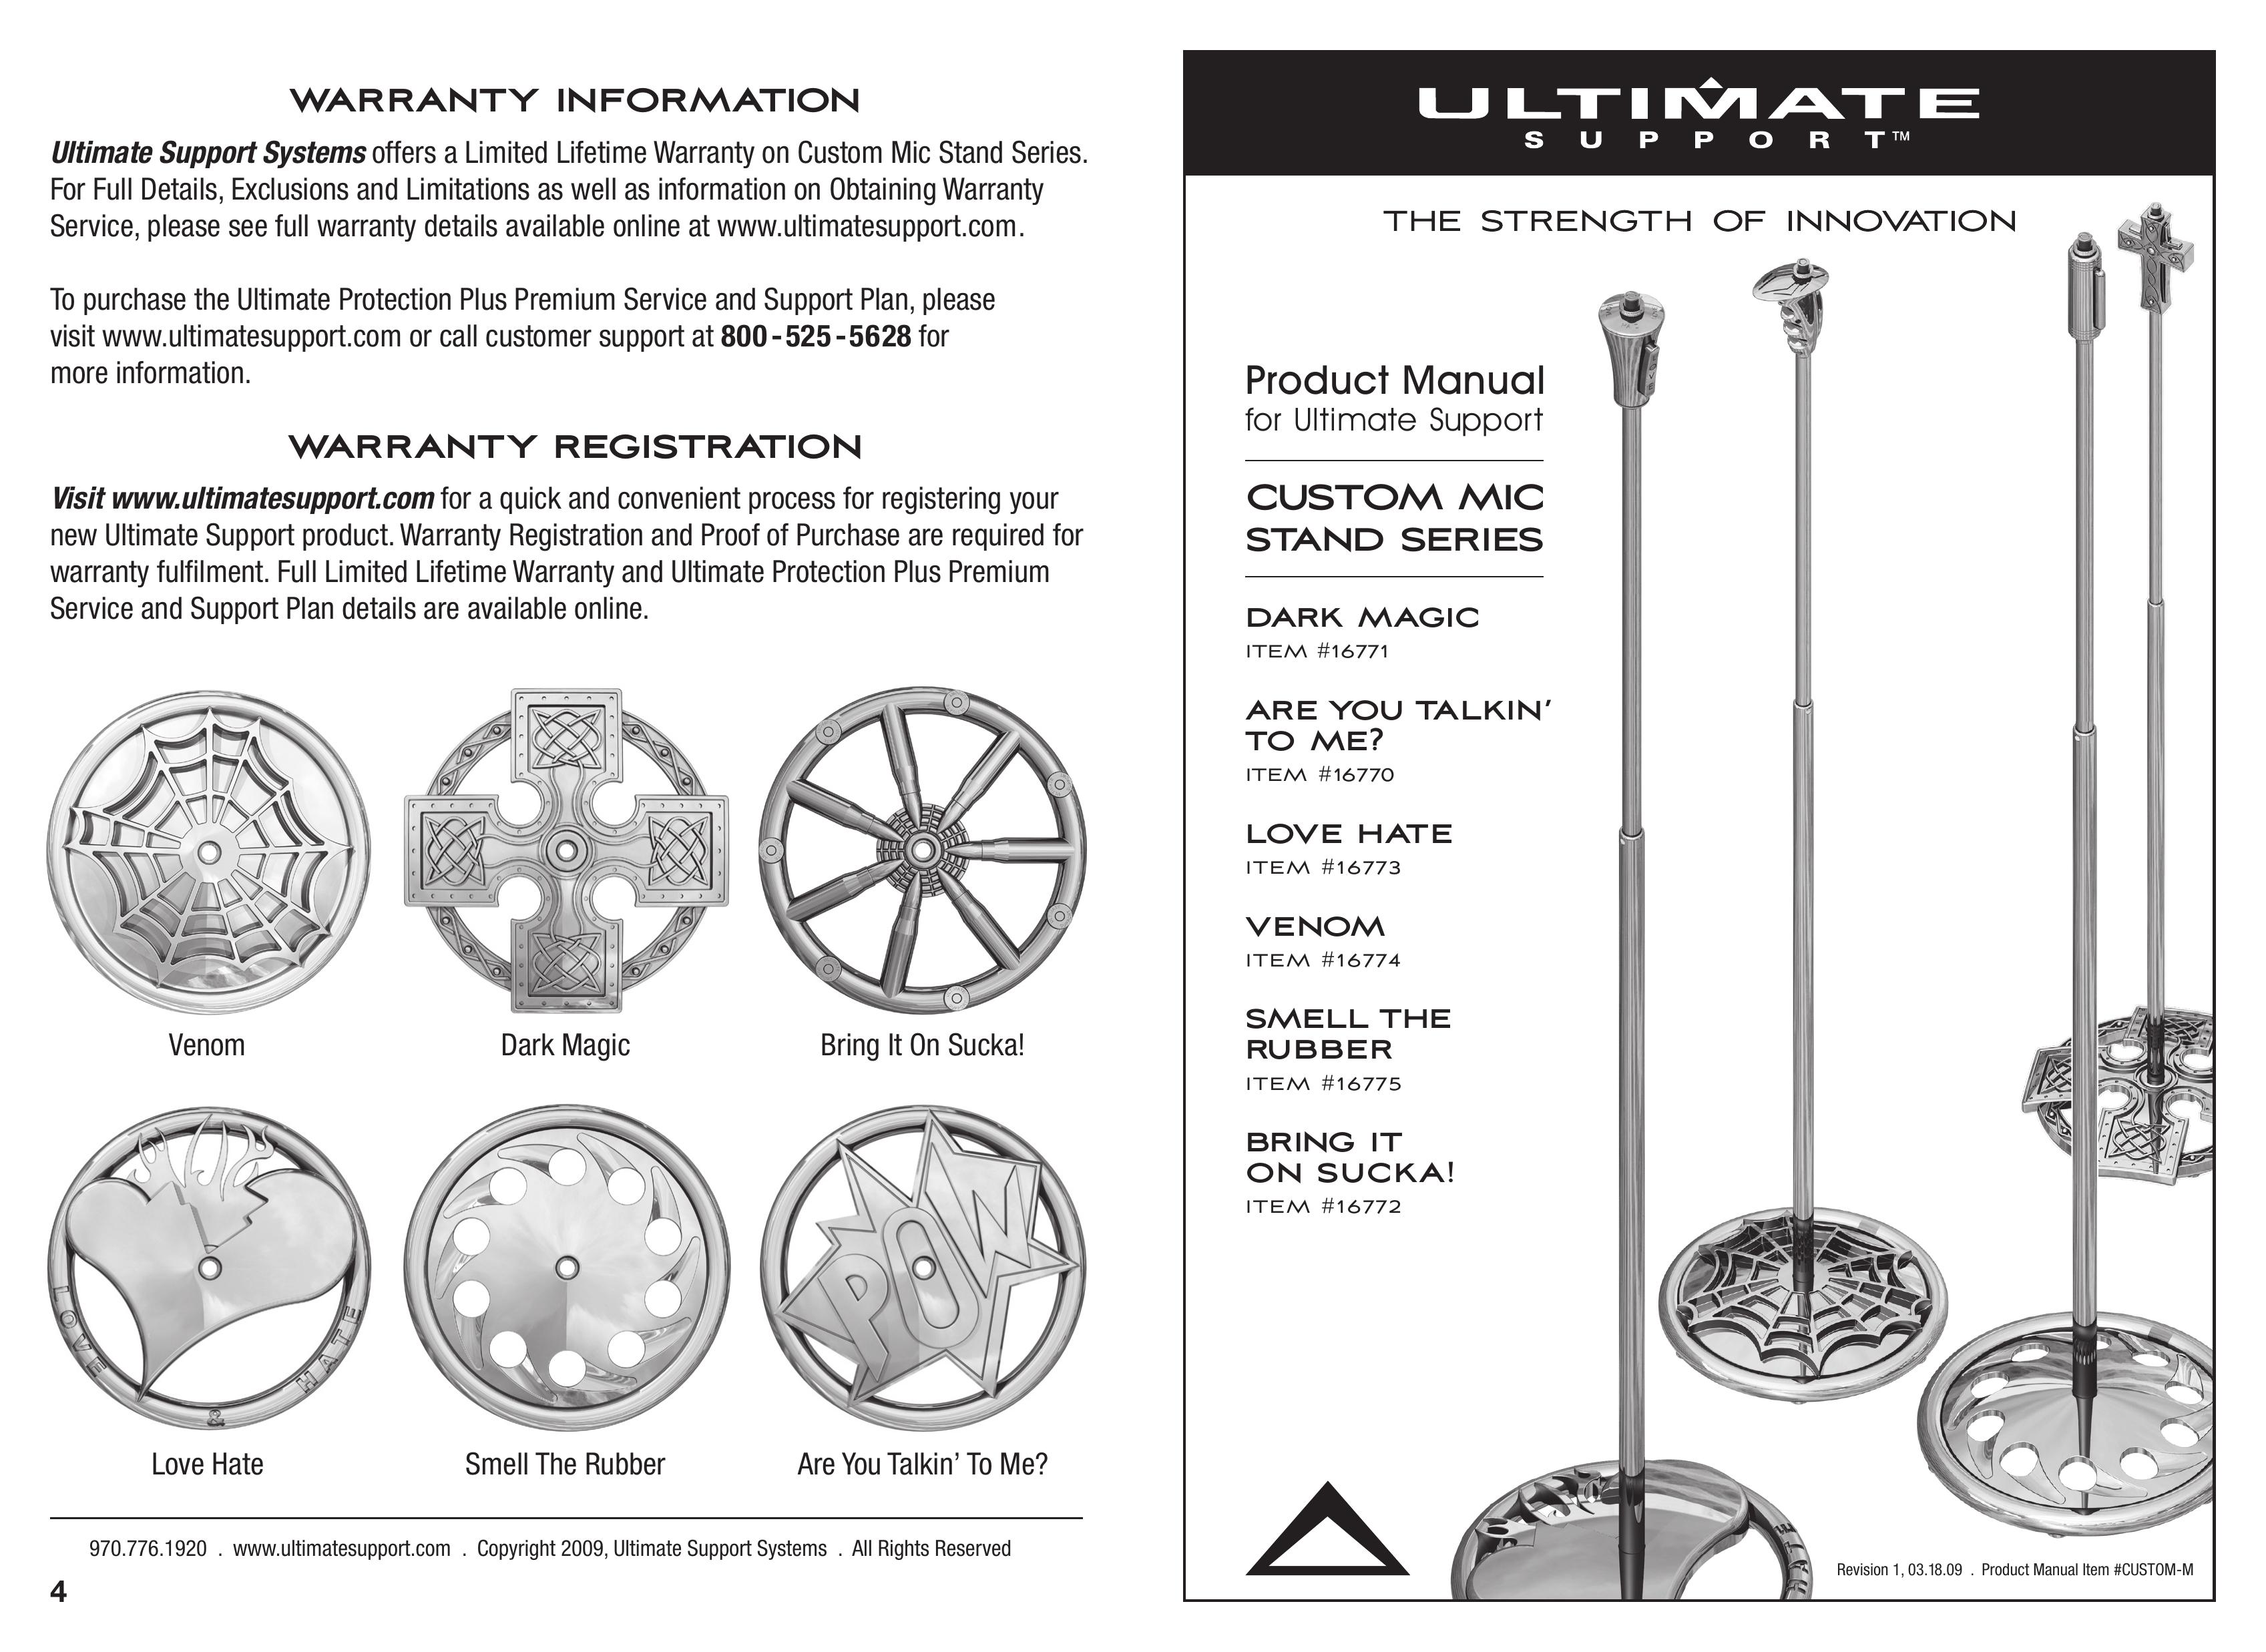 Ultimate Support Systems 16775 Microphone User Manual